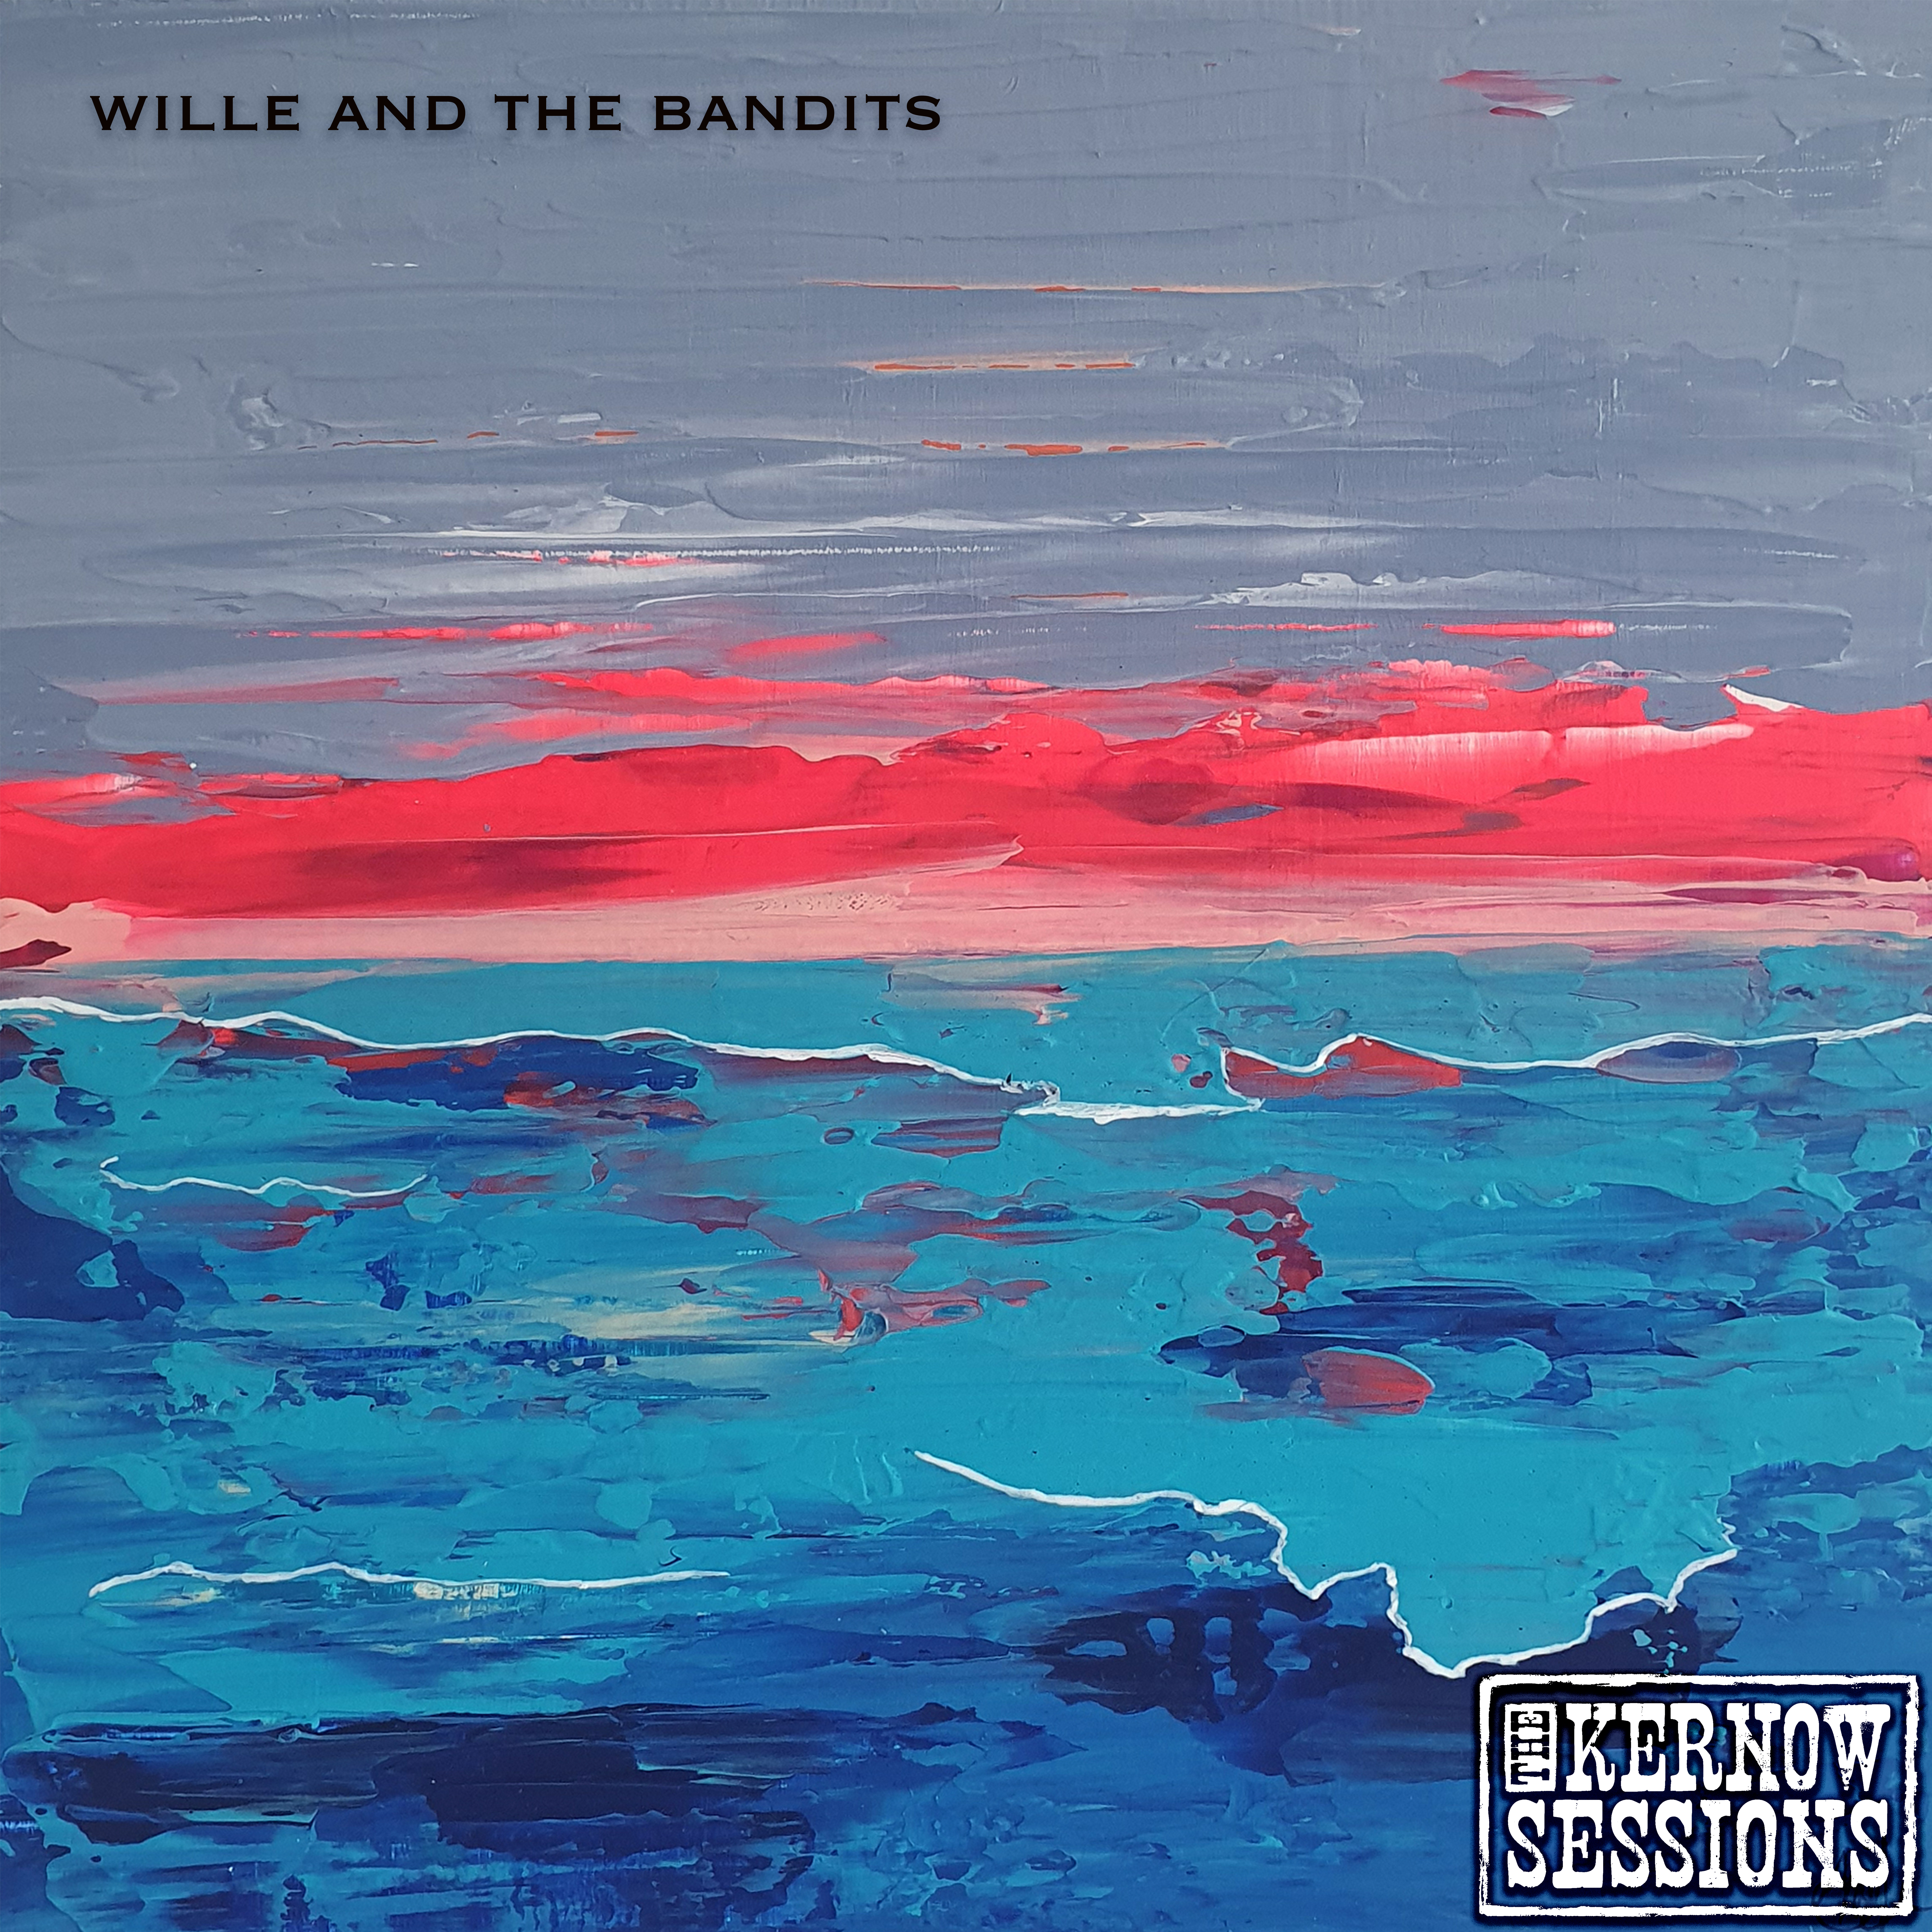 Kernow Sessions Vinyl Double | Pre Order - Wille and the Bandits